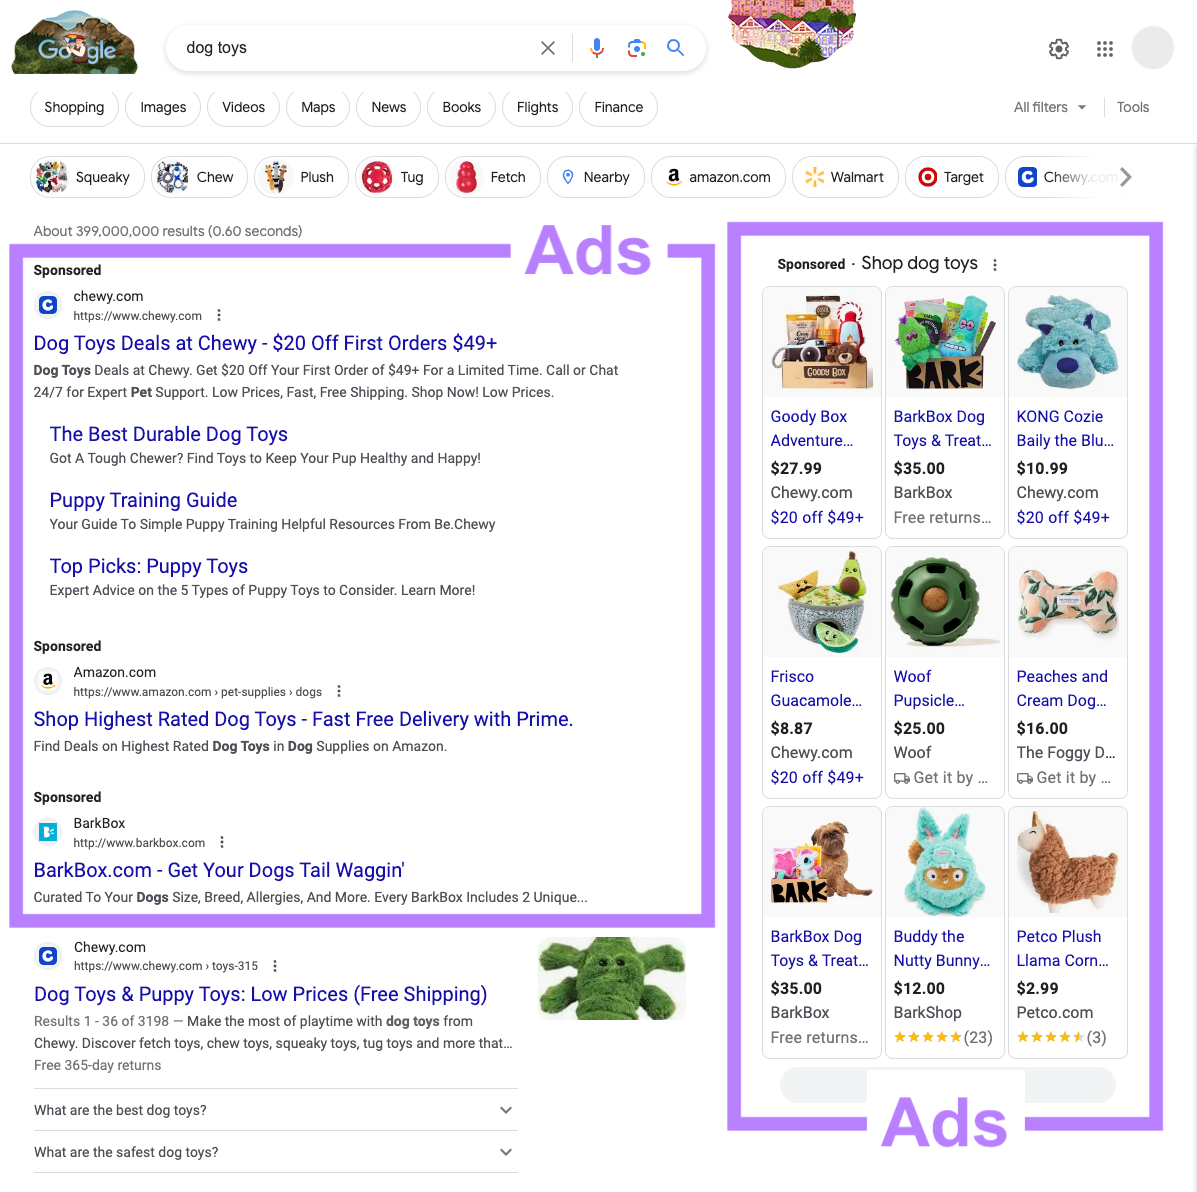 Google’s first page including ads